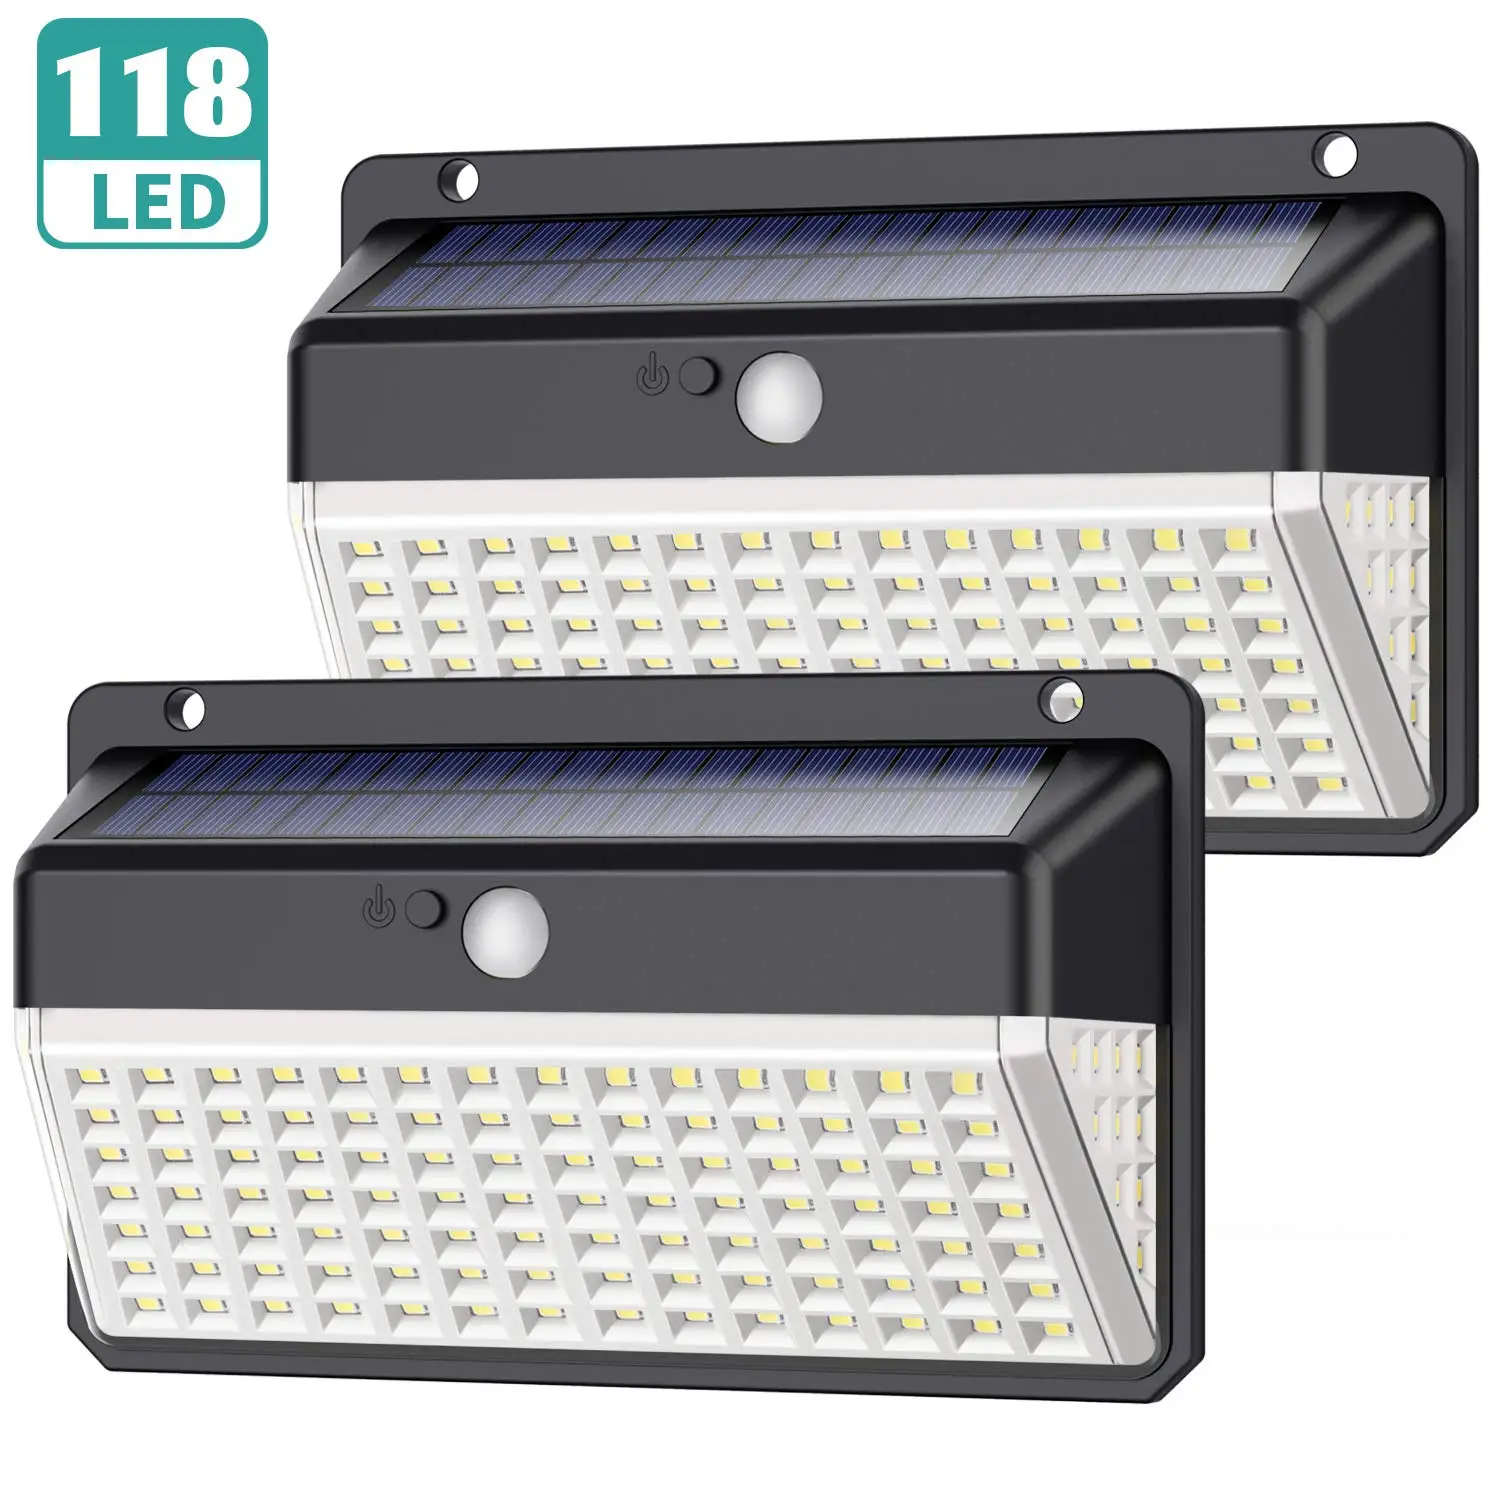 Solar Lights Outdoor 118 LED Solar Security Sensor Lights Wide Angle Solar Waterproof Wall Lights with 3 Modes for Outside